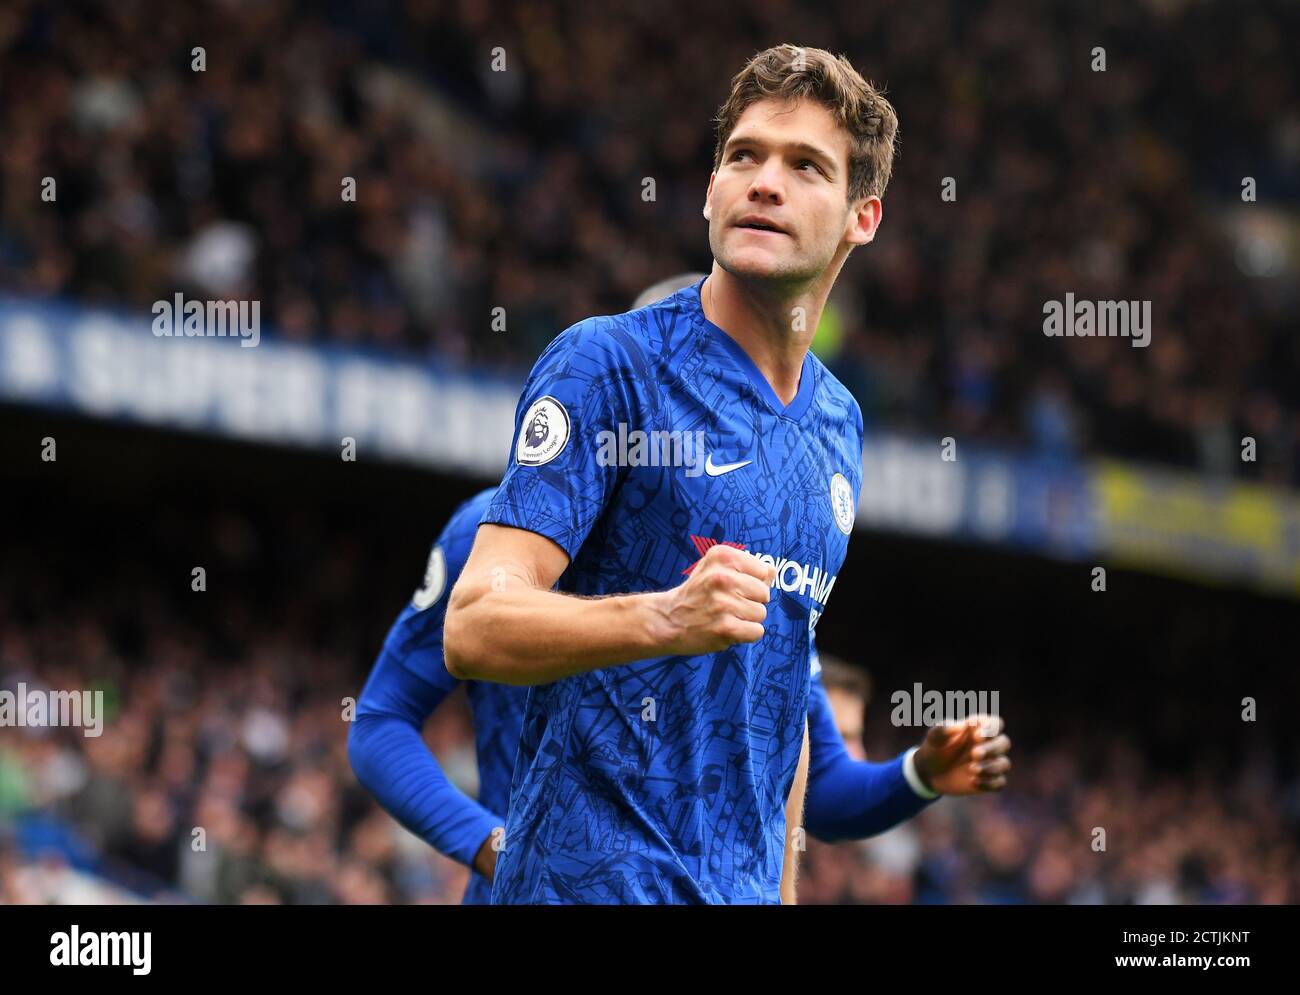 LONDON, ENGLAND - FEBRUARY 22, 2020: Marcos Alonso of Chelsea celebrates after a goal scored during the 2019/20 Premier League game between Chelsea FC and Tottenham Hotspur FC at Stamford Bridge. Stock Photo